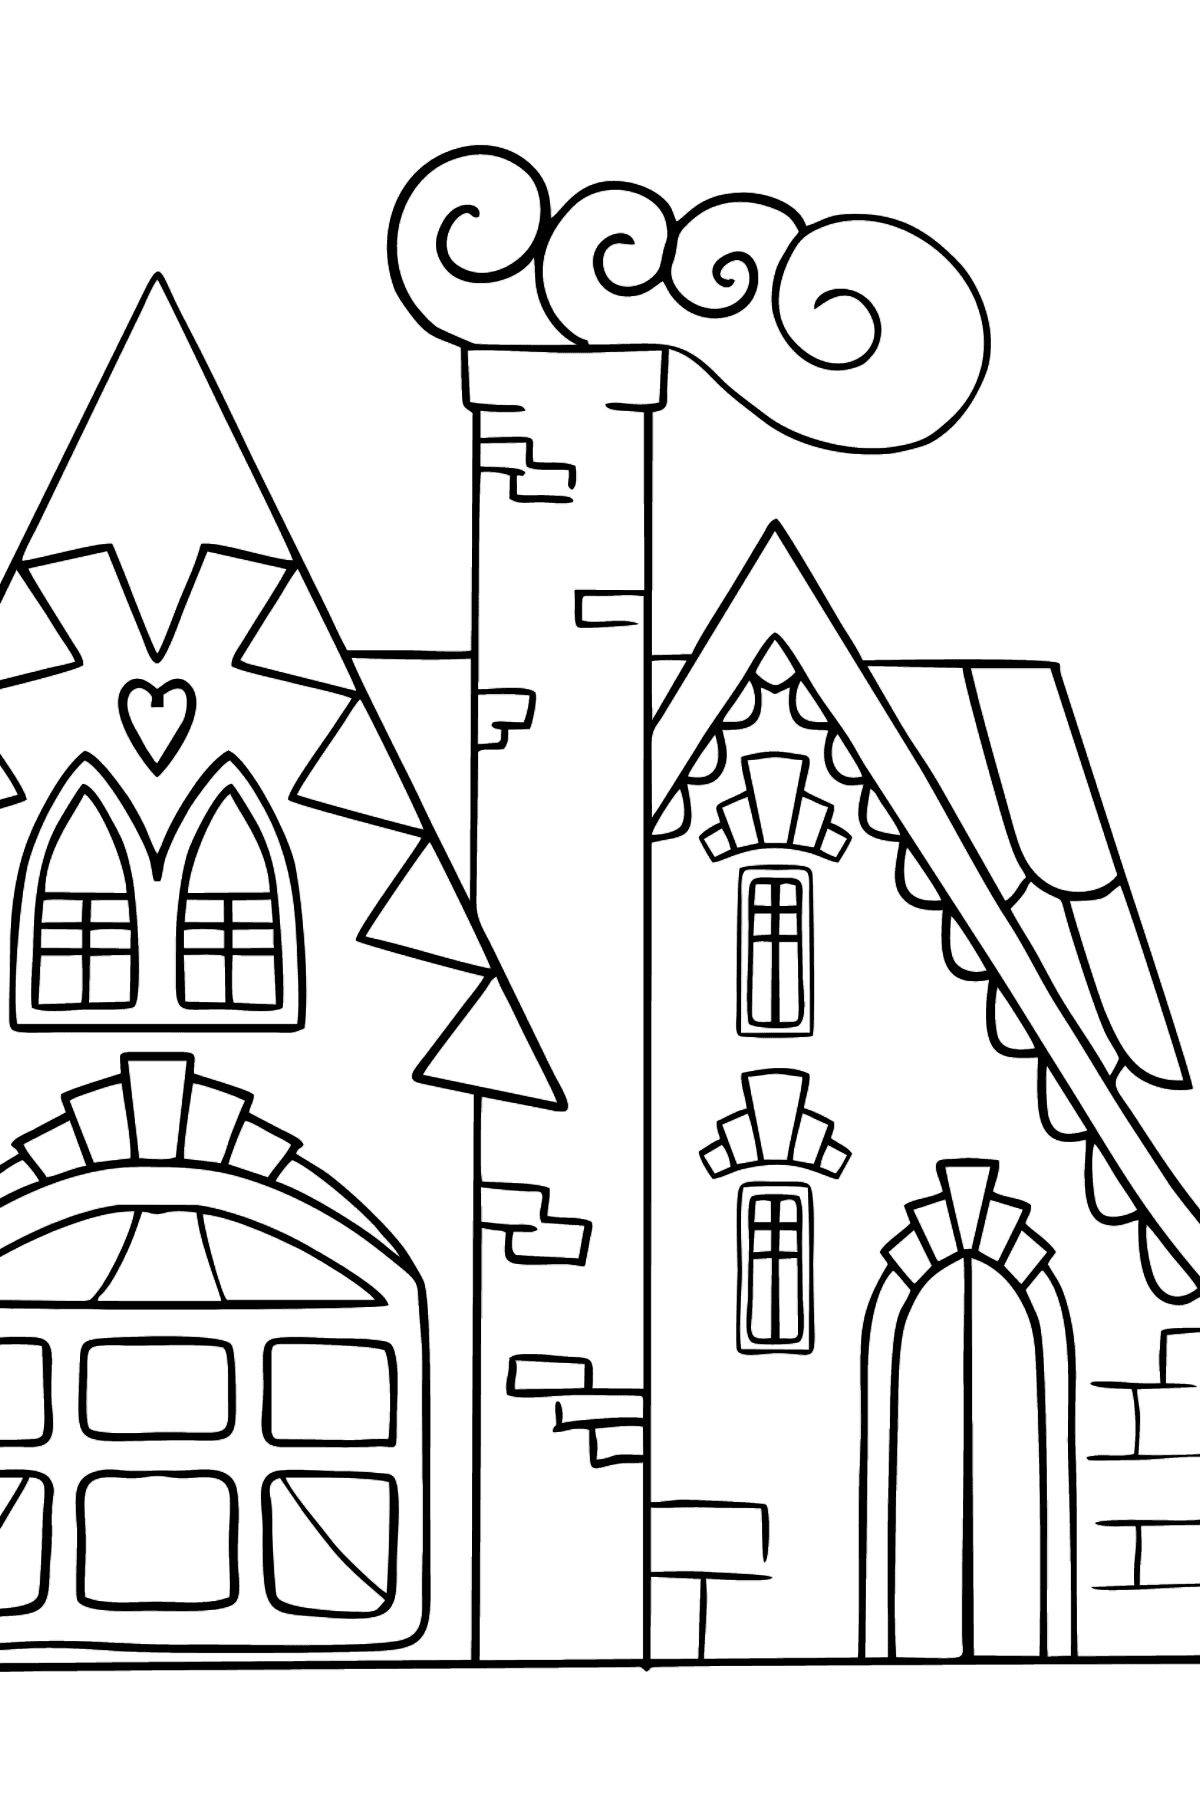 Charming House Coloring Page (Easy) - Coloring Pages for Kids